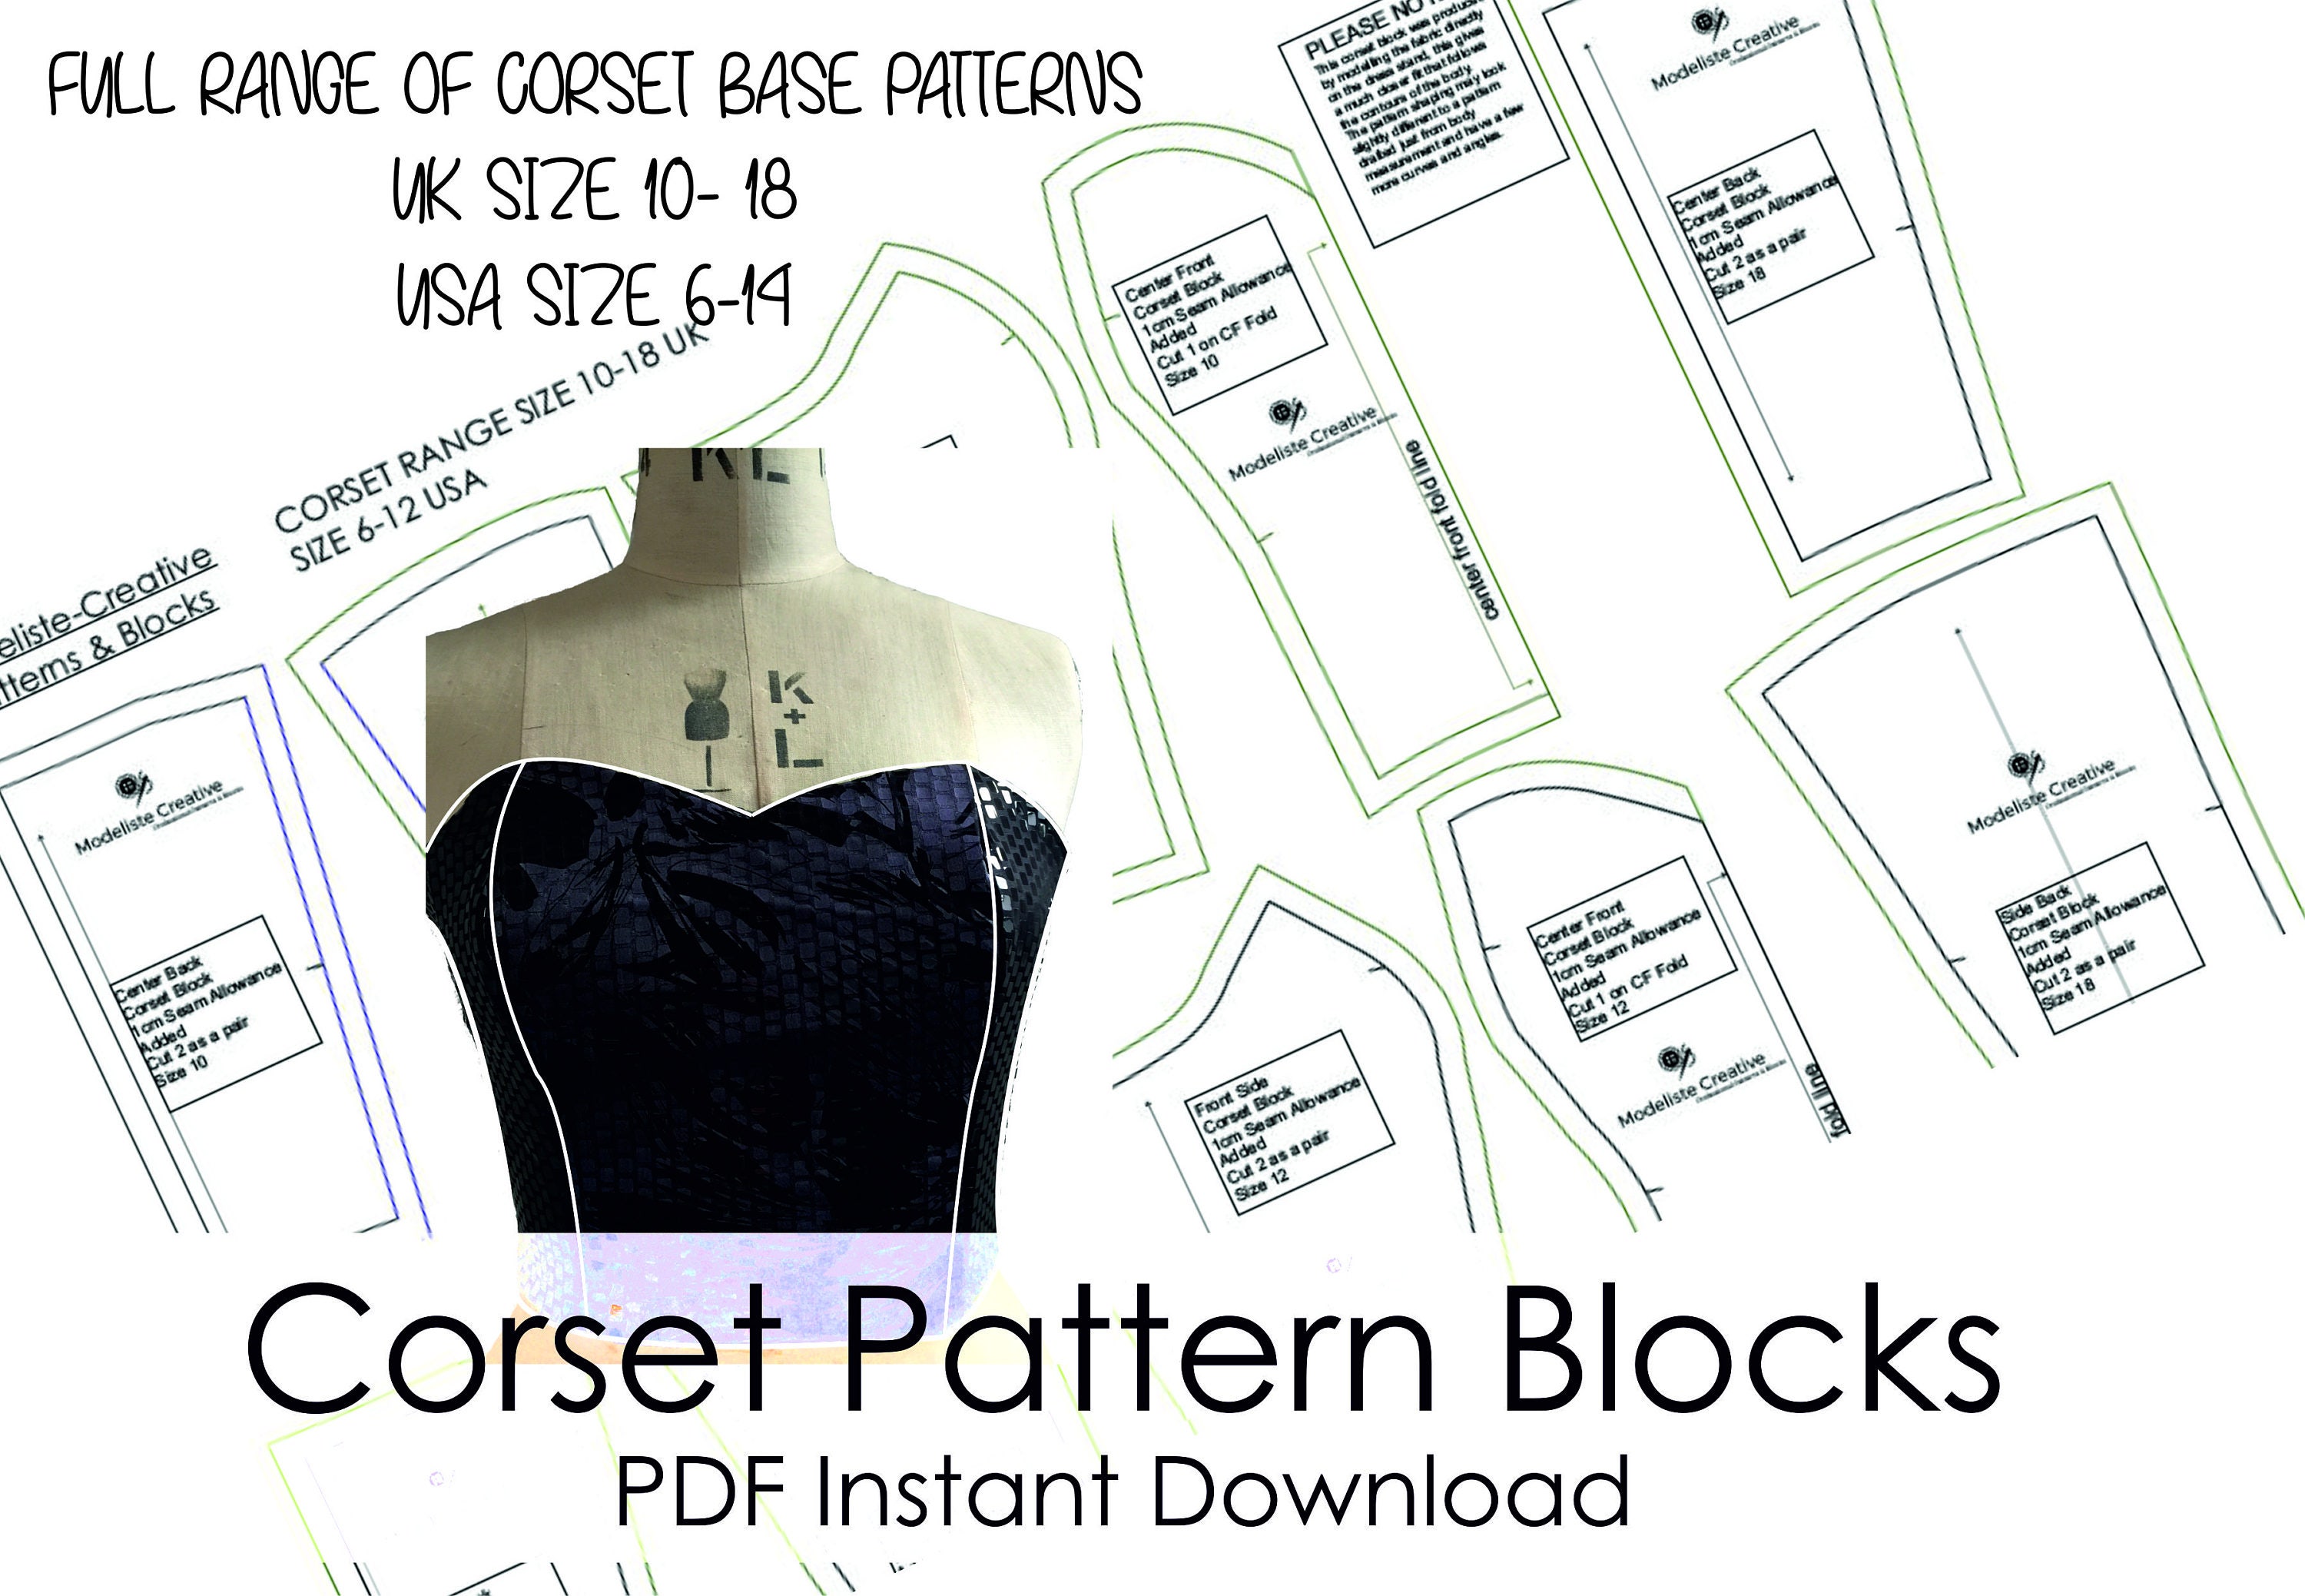 The Contour Fitted Dress Block- my favourite block! – Modeliste